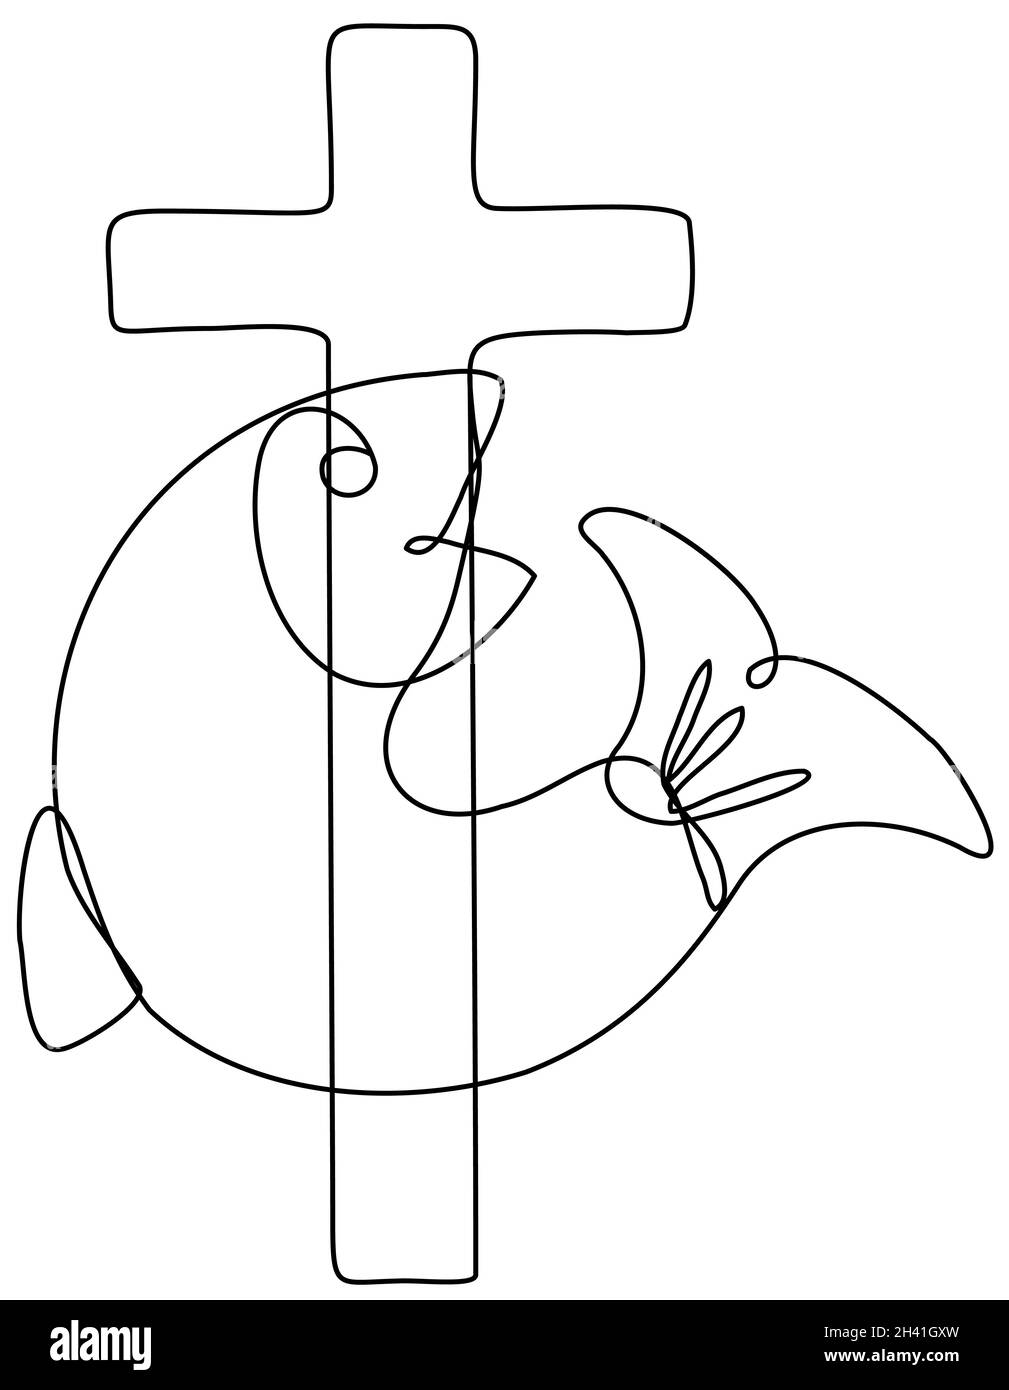 Fish and Cross Symbol of Christianity Continuous Line Drawing Stock Photo